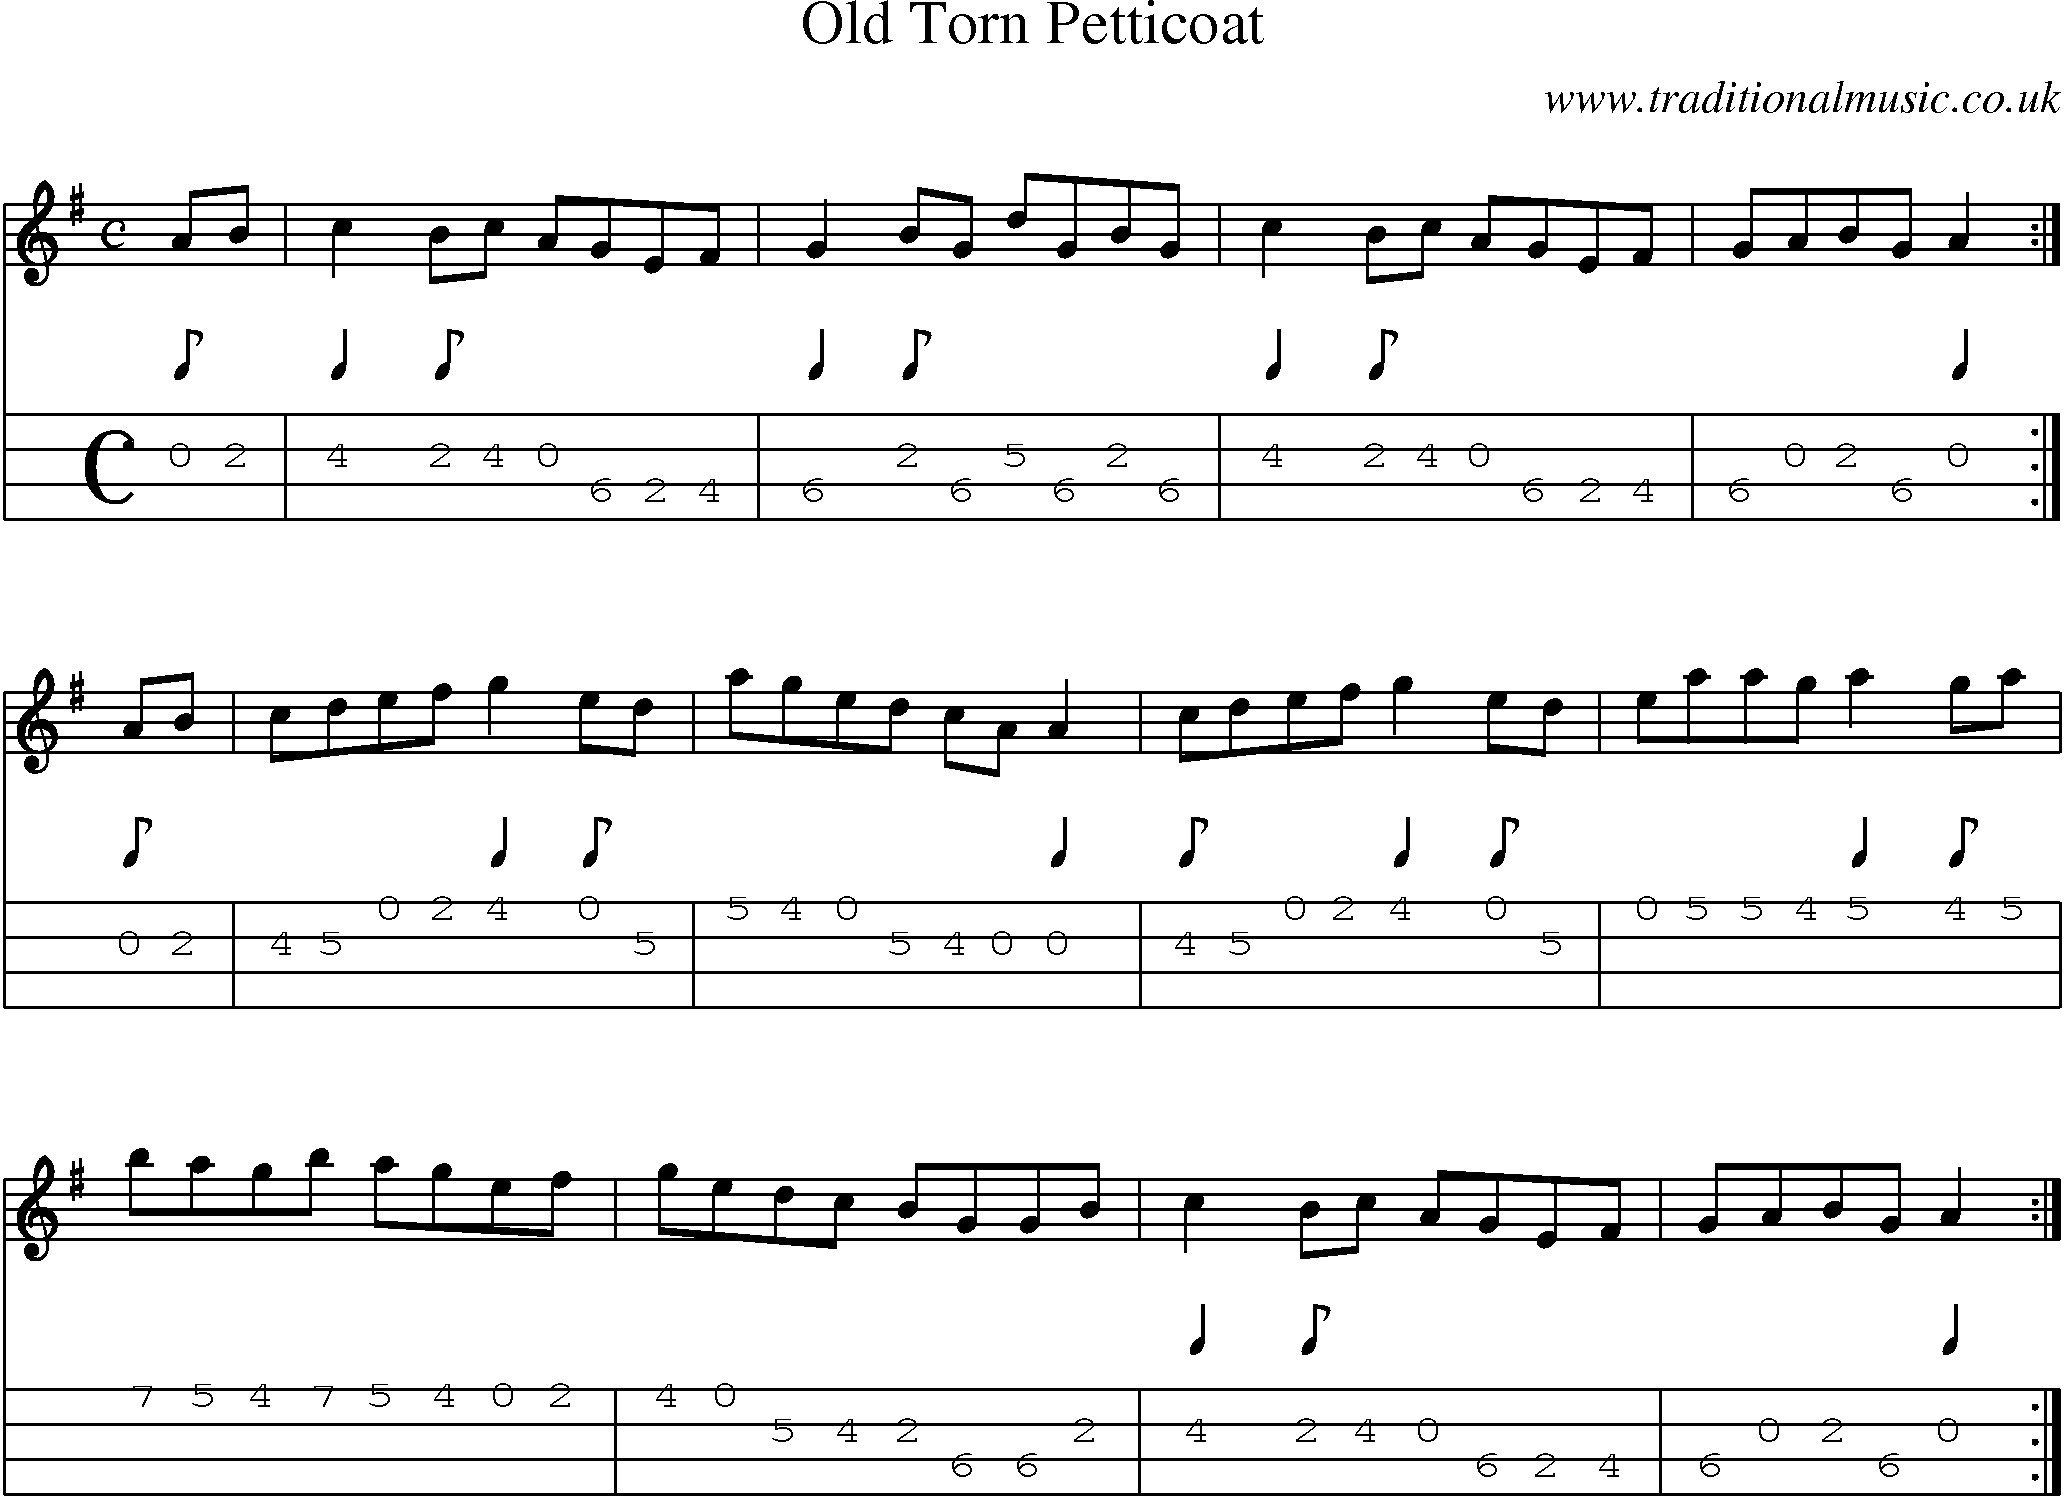 Music Score and Mandolin Tabs for Old Torn Petticoat